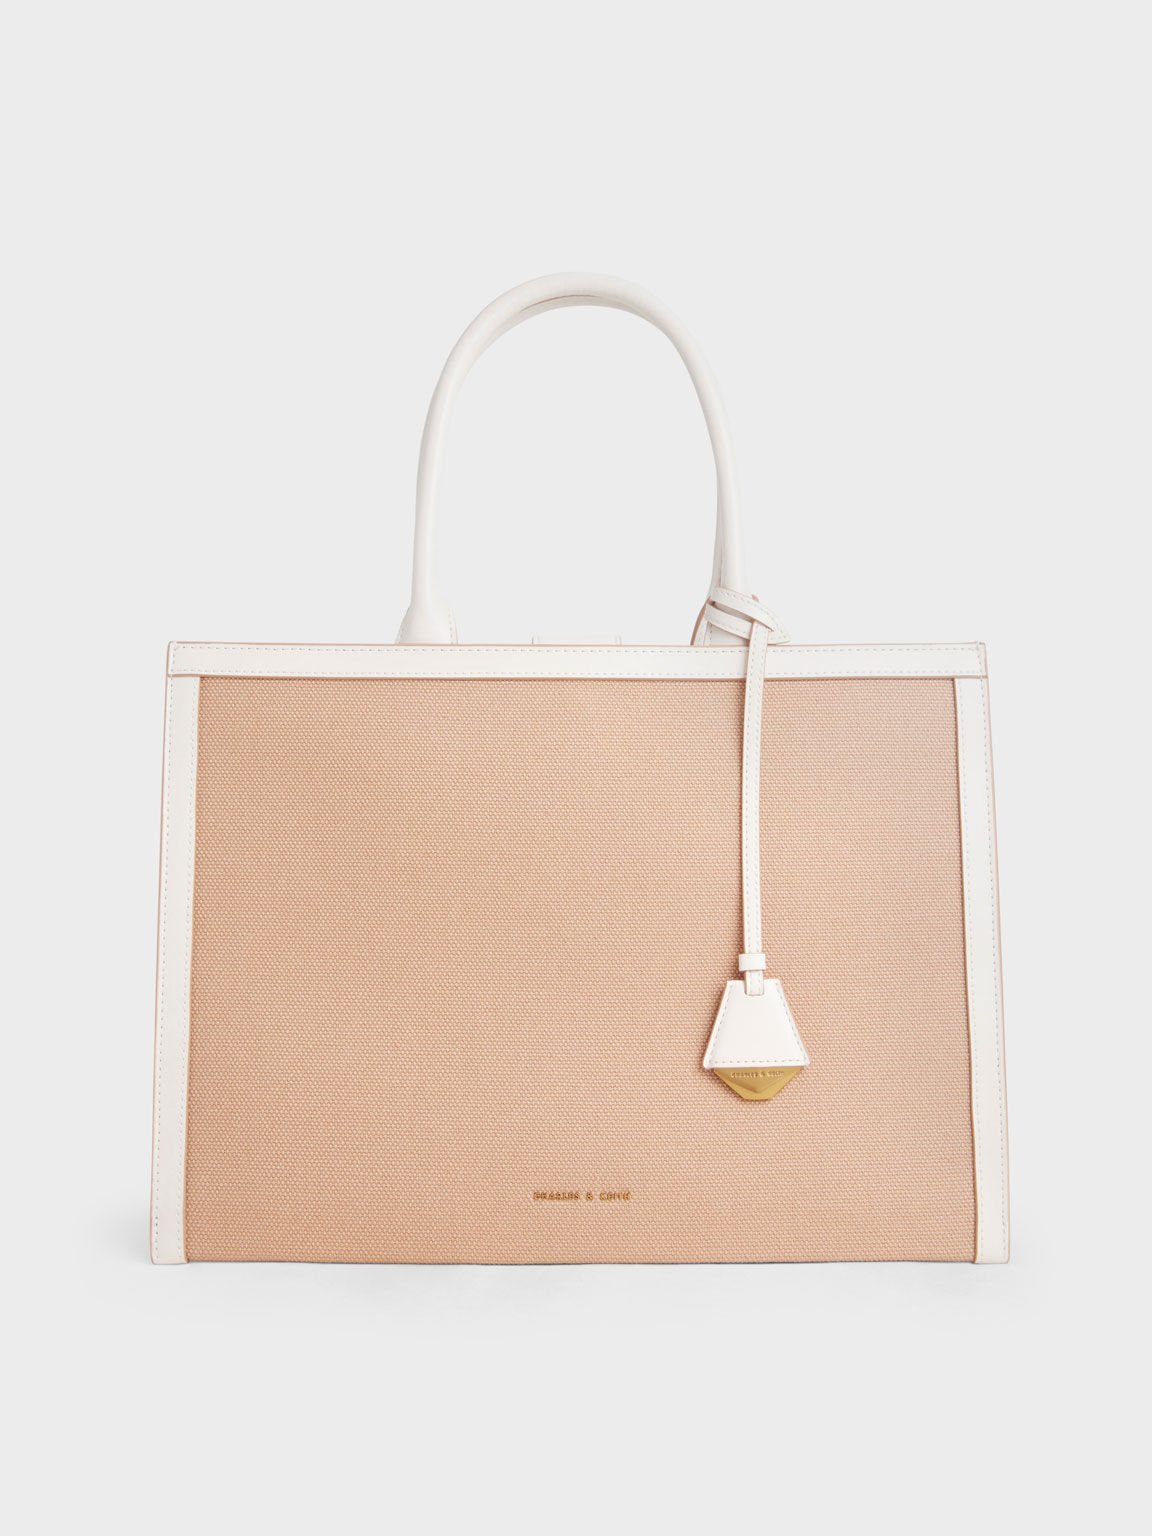 Women's Tote Bags | Shop Exclusive Styles - CHARLES & KEITH PT